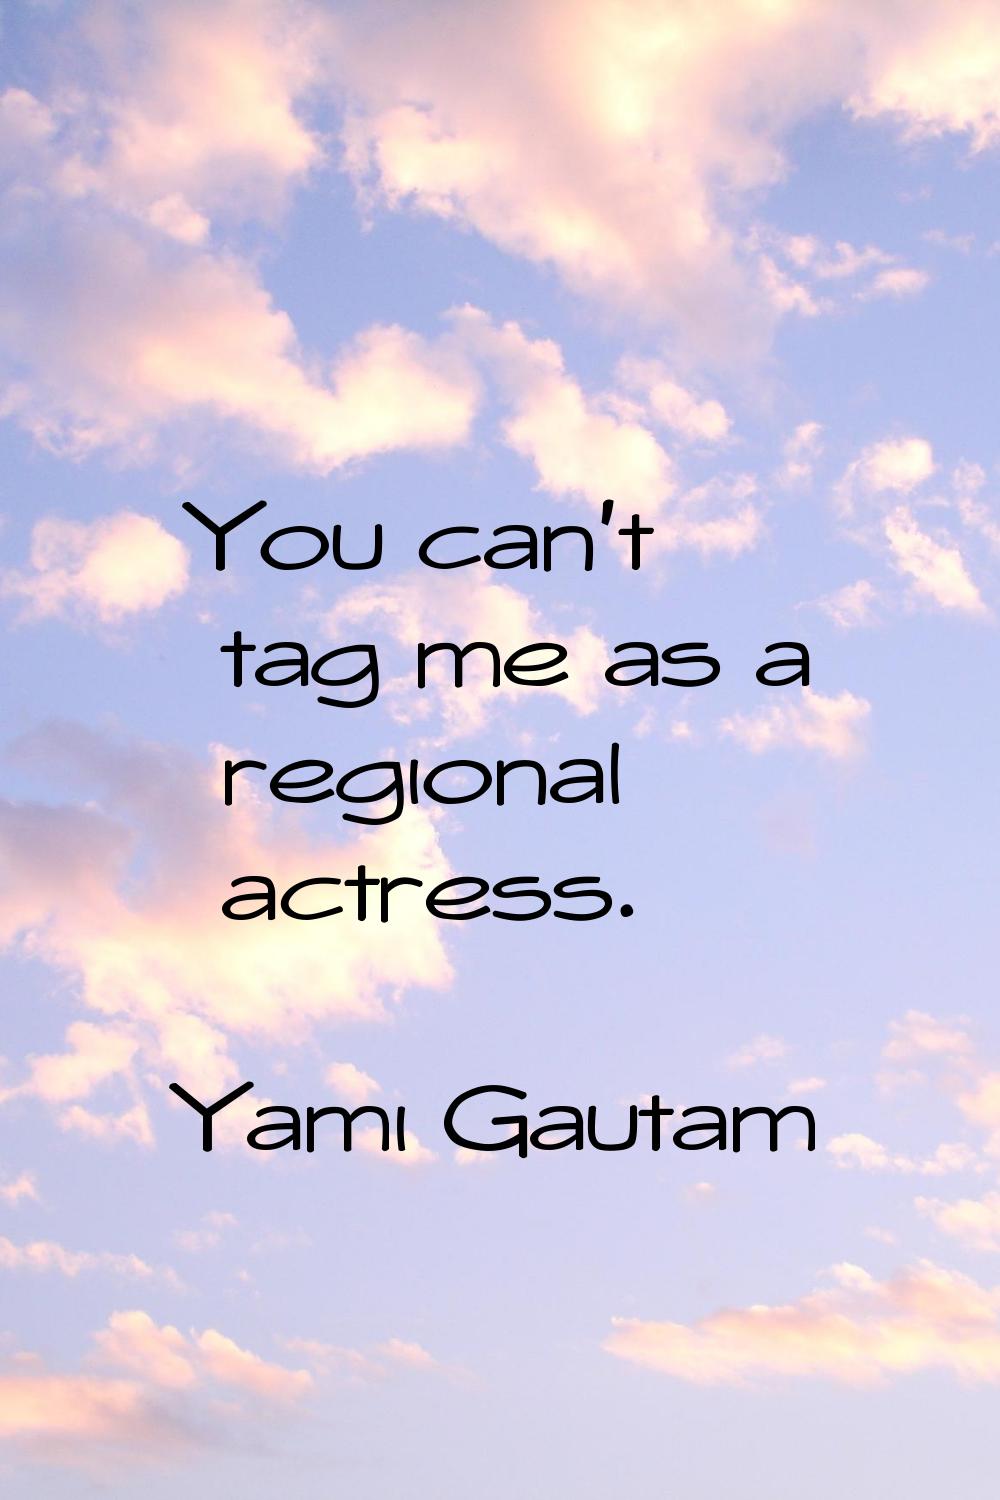 You can't tag me as a regional actress.